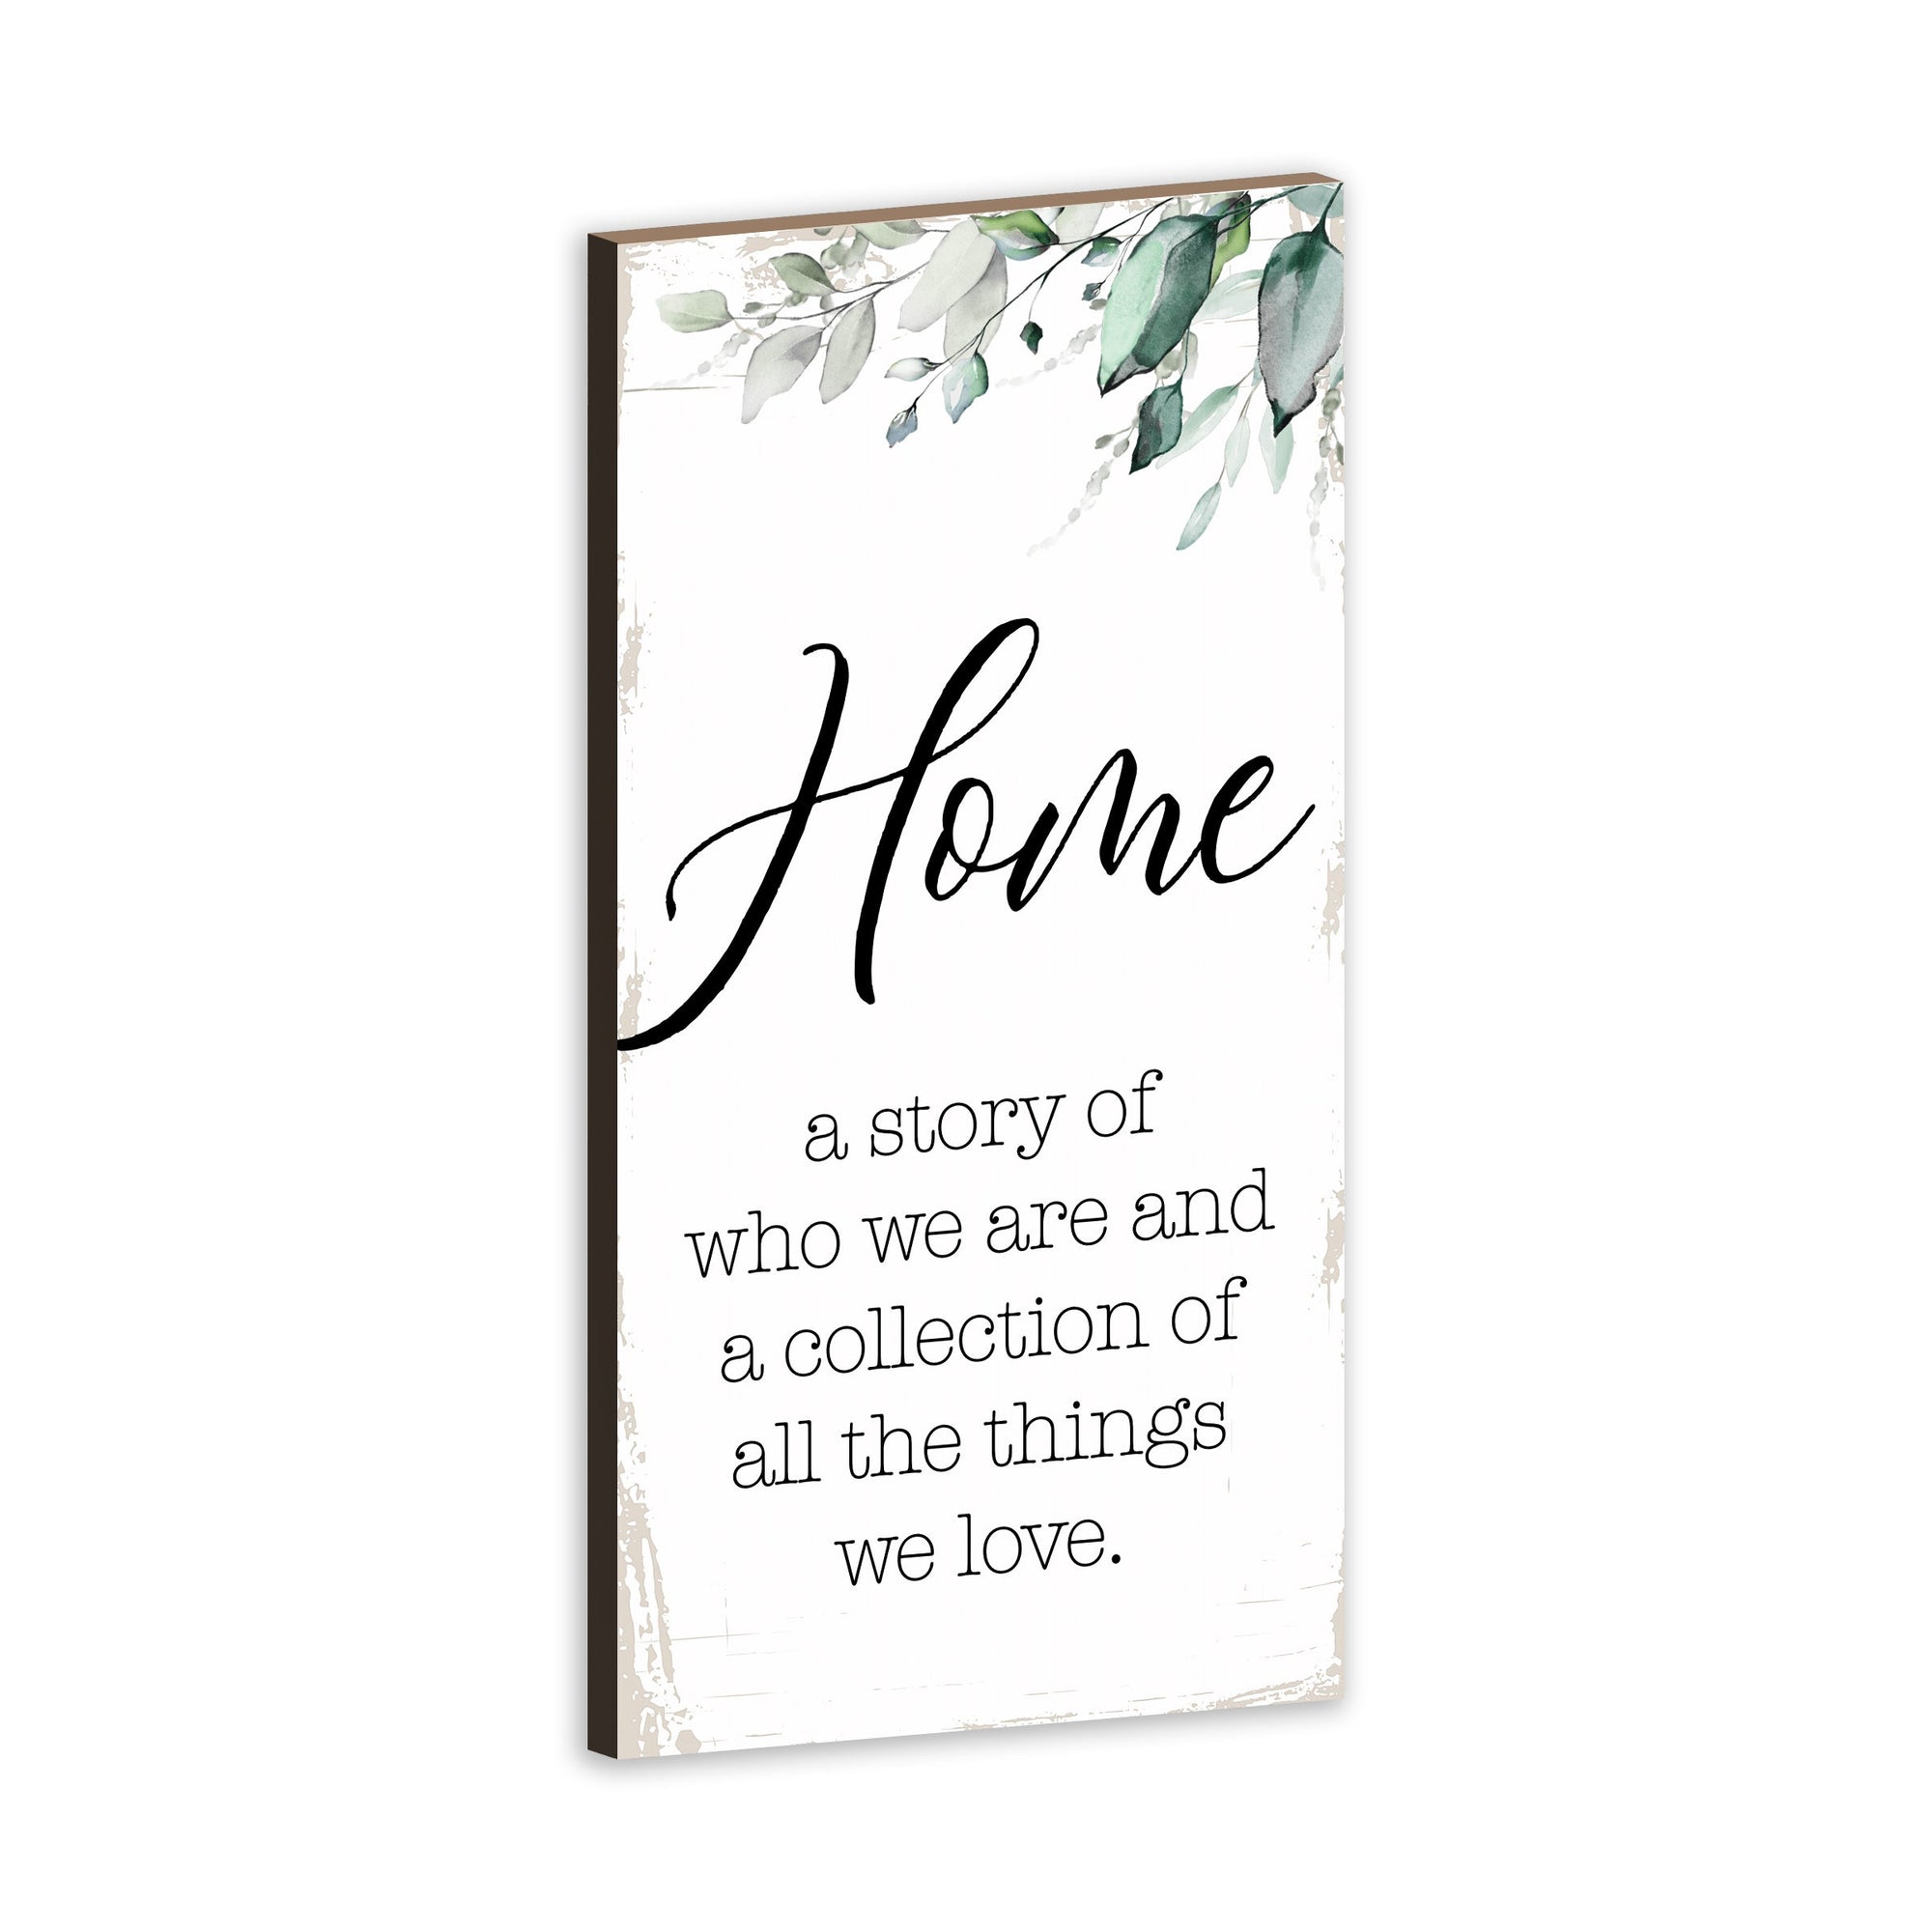 Wooden Family Wall Plaque: A Beautiful Wall Decor Gift for Loved Ones